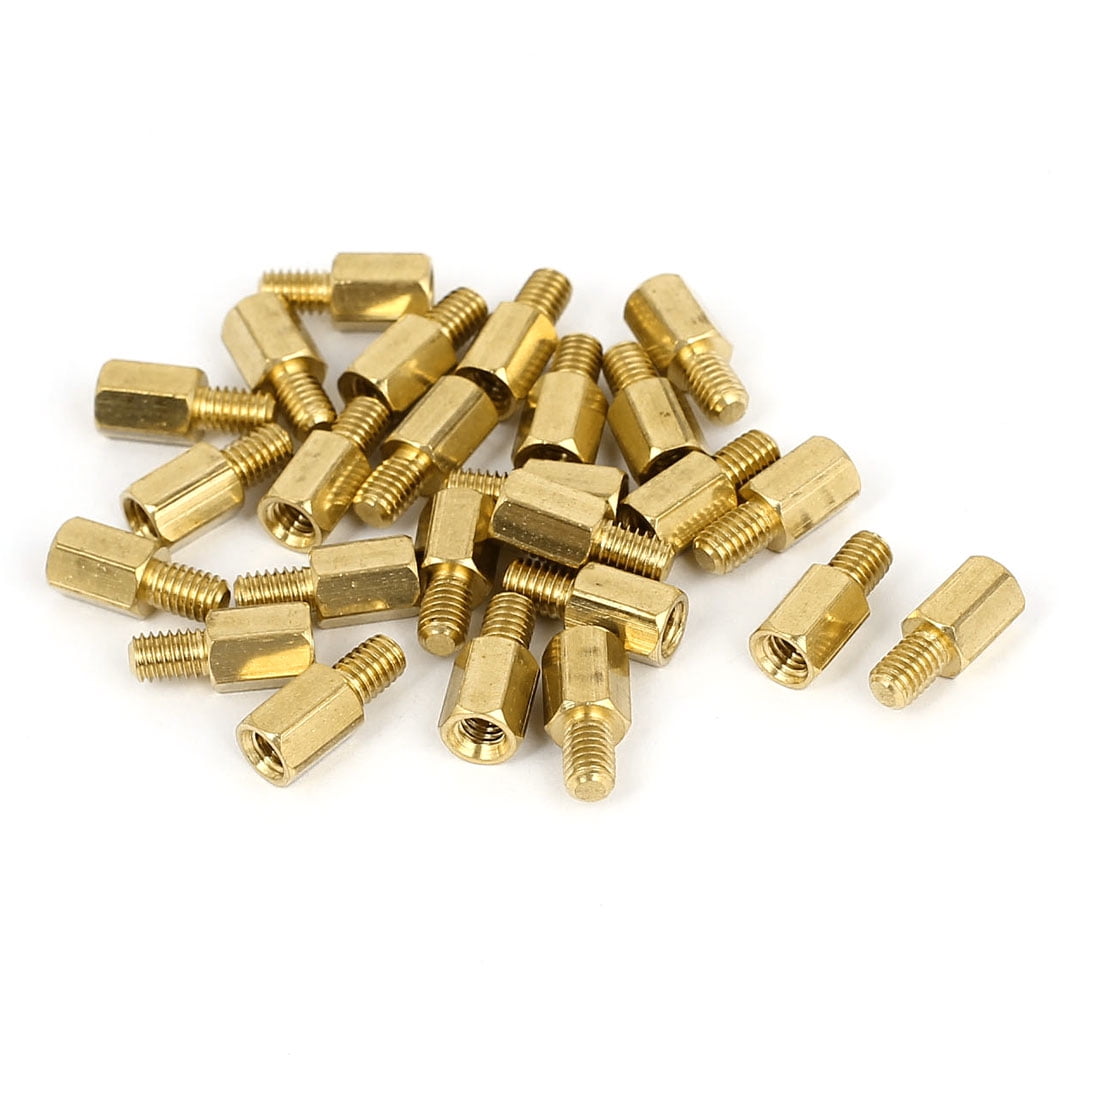 25 pcs New Brass Hex Stand-Off Pillars Male to Female 6mm 6mm M3 Good Quality 